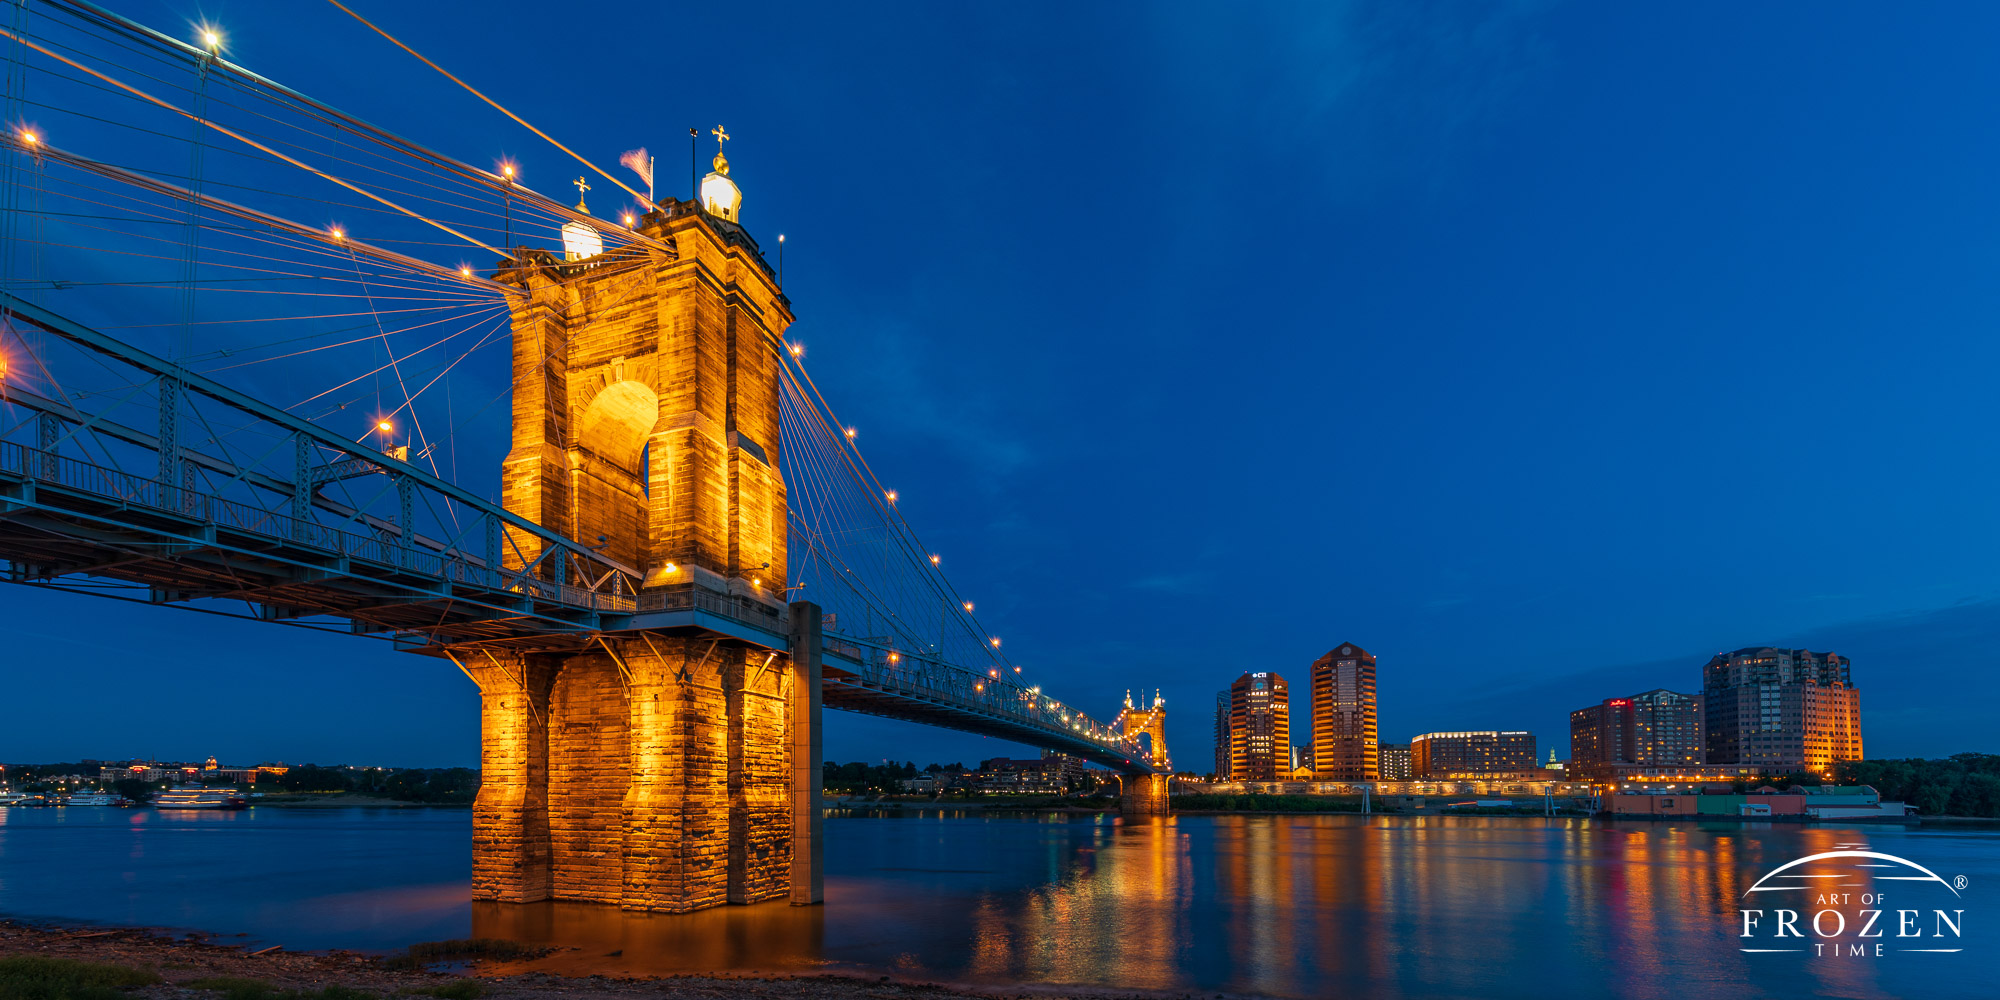 A twilight image of the John A. Roebling Suspension Bridge as its warm yellowish lights illuminates the evening as it spans the Ohio River